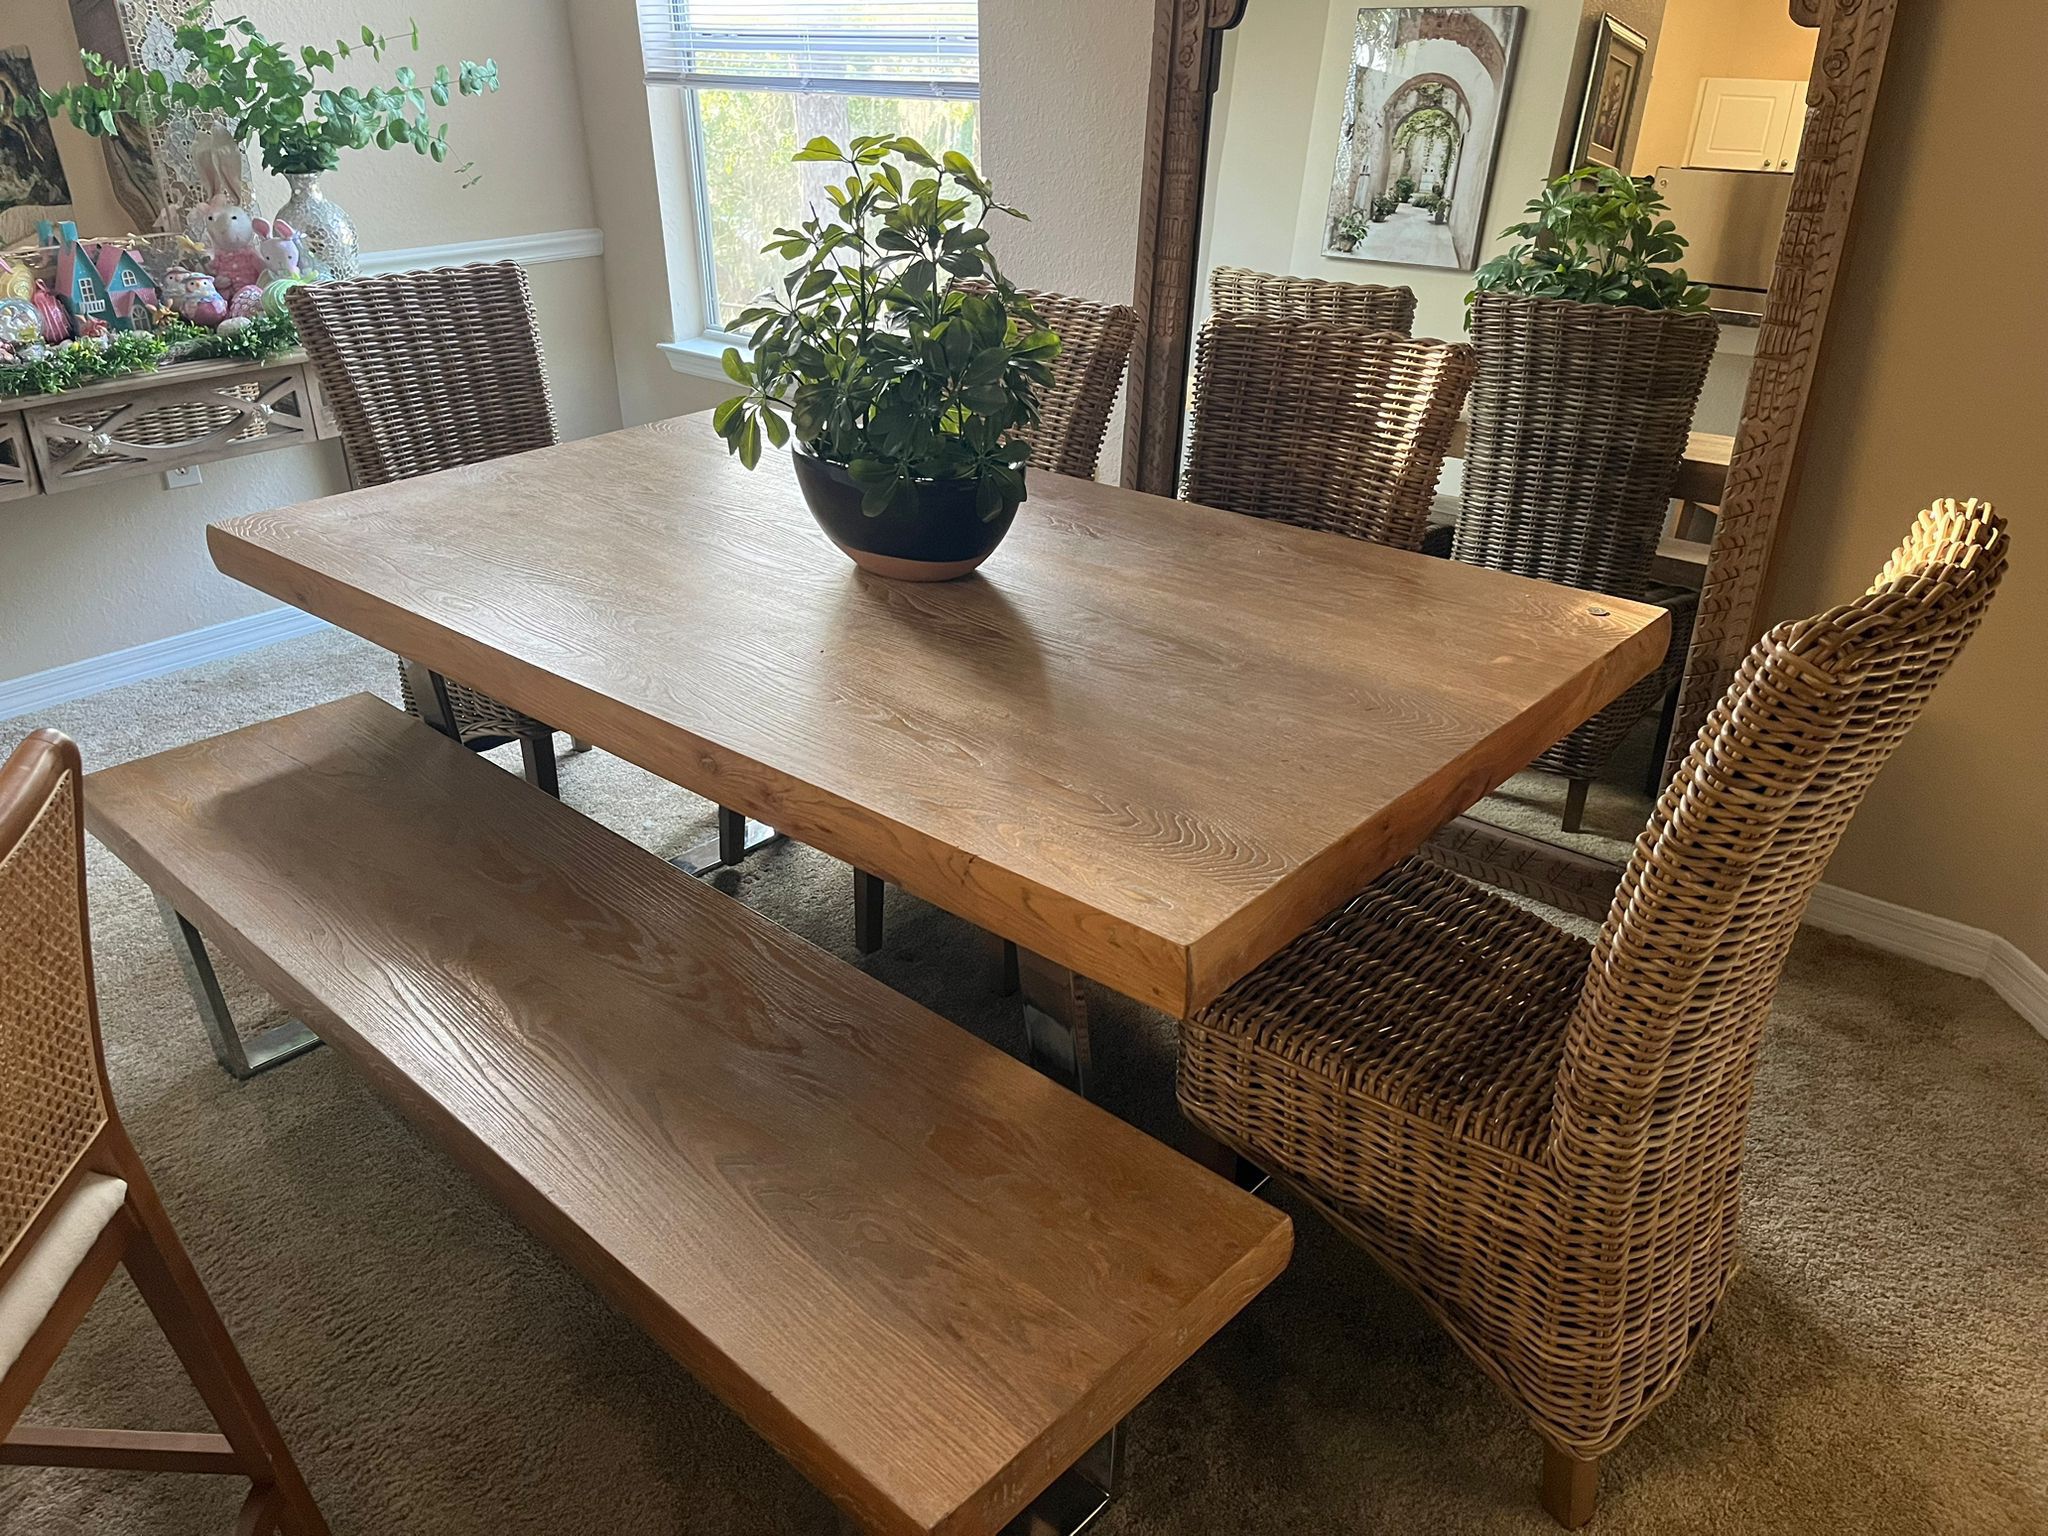 Wood Dining Table Seats 6 To 7